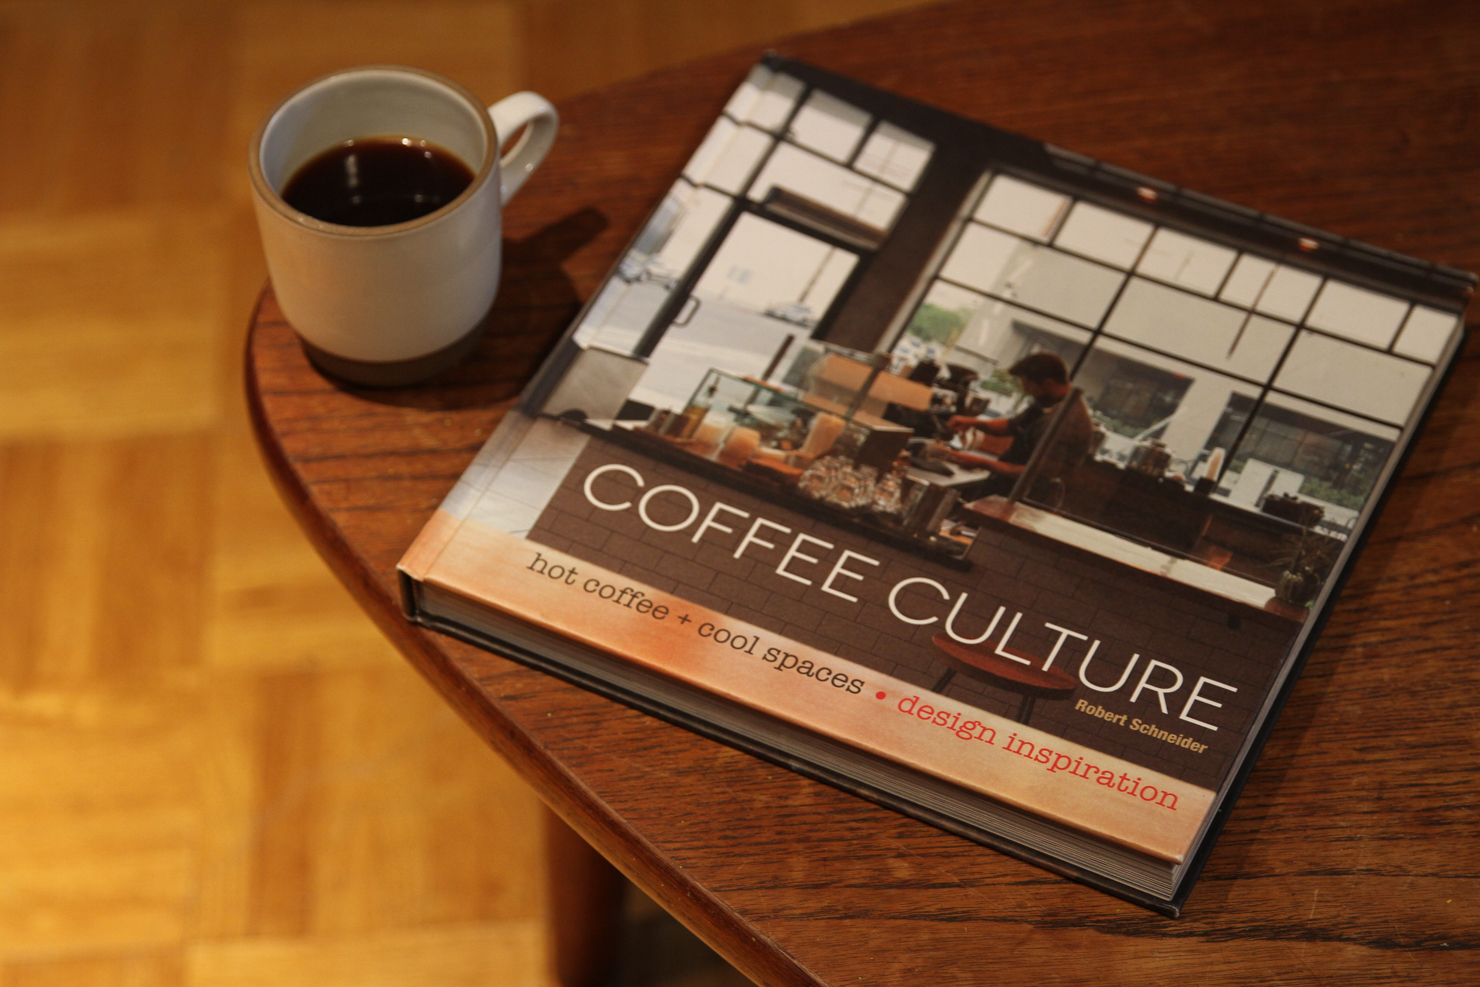 coffee culture hot coffee cool spaces usa design cafe book robert schneider interview sprudge images publishing